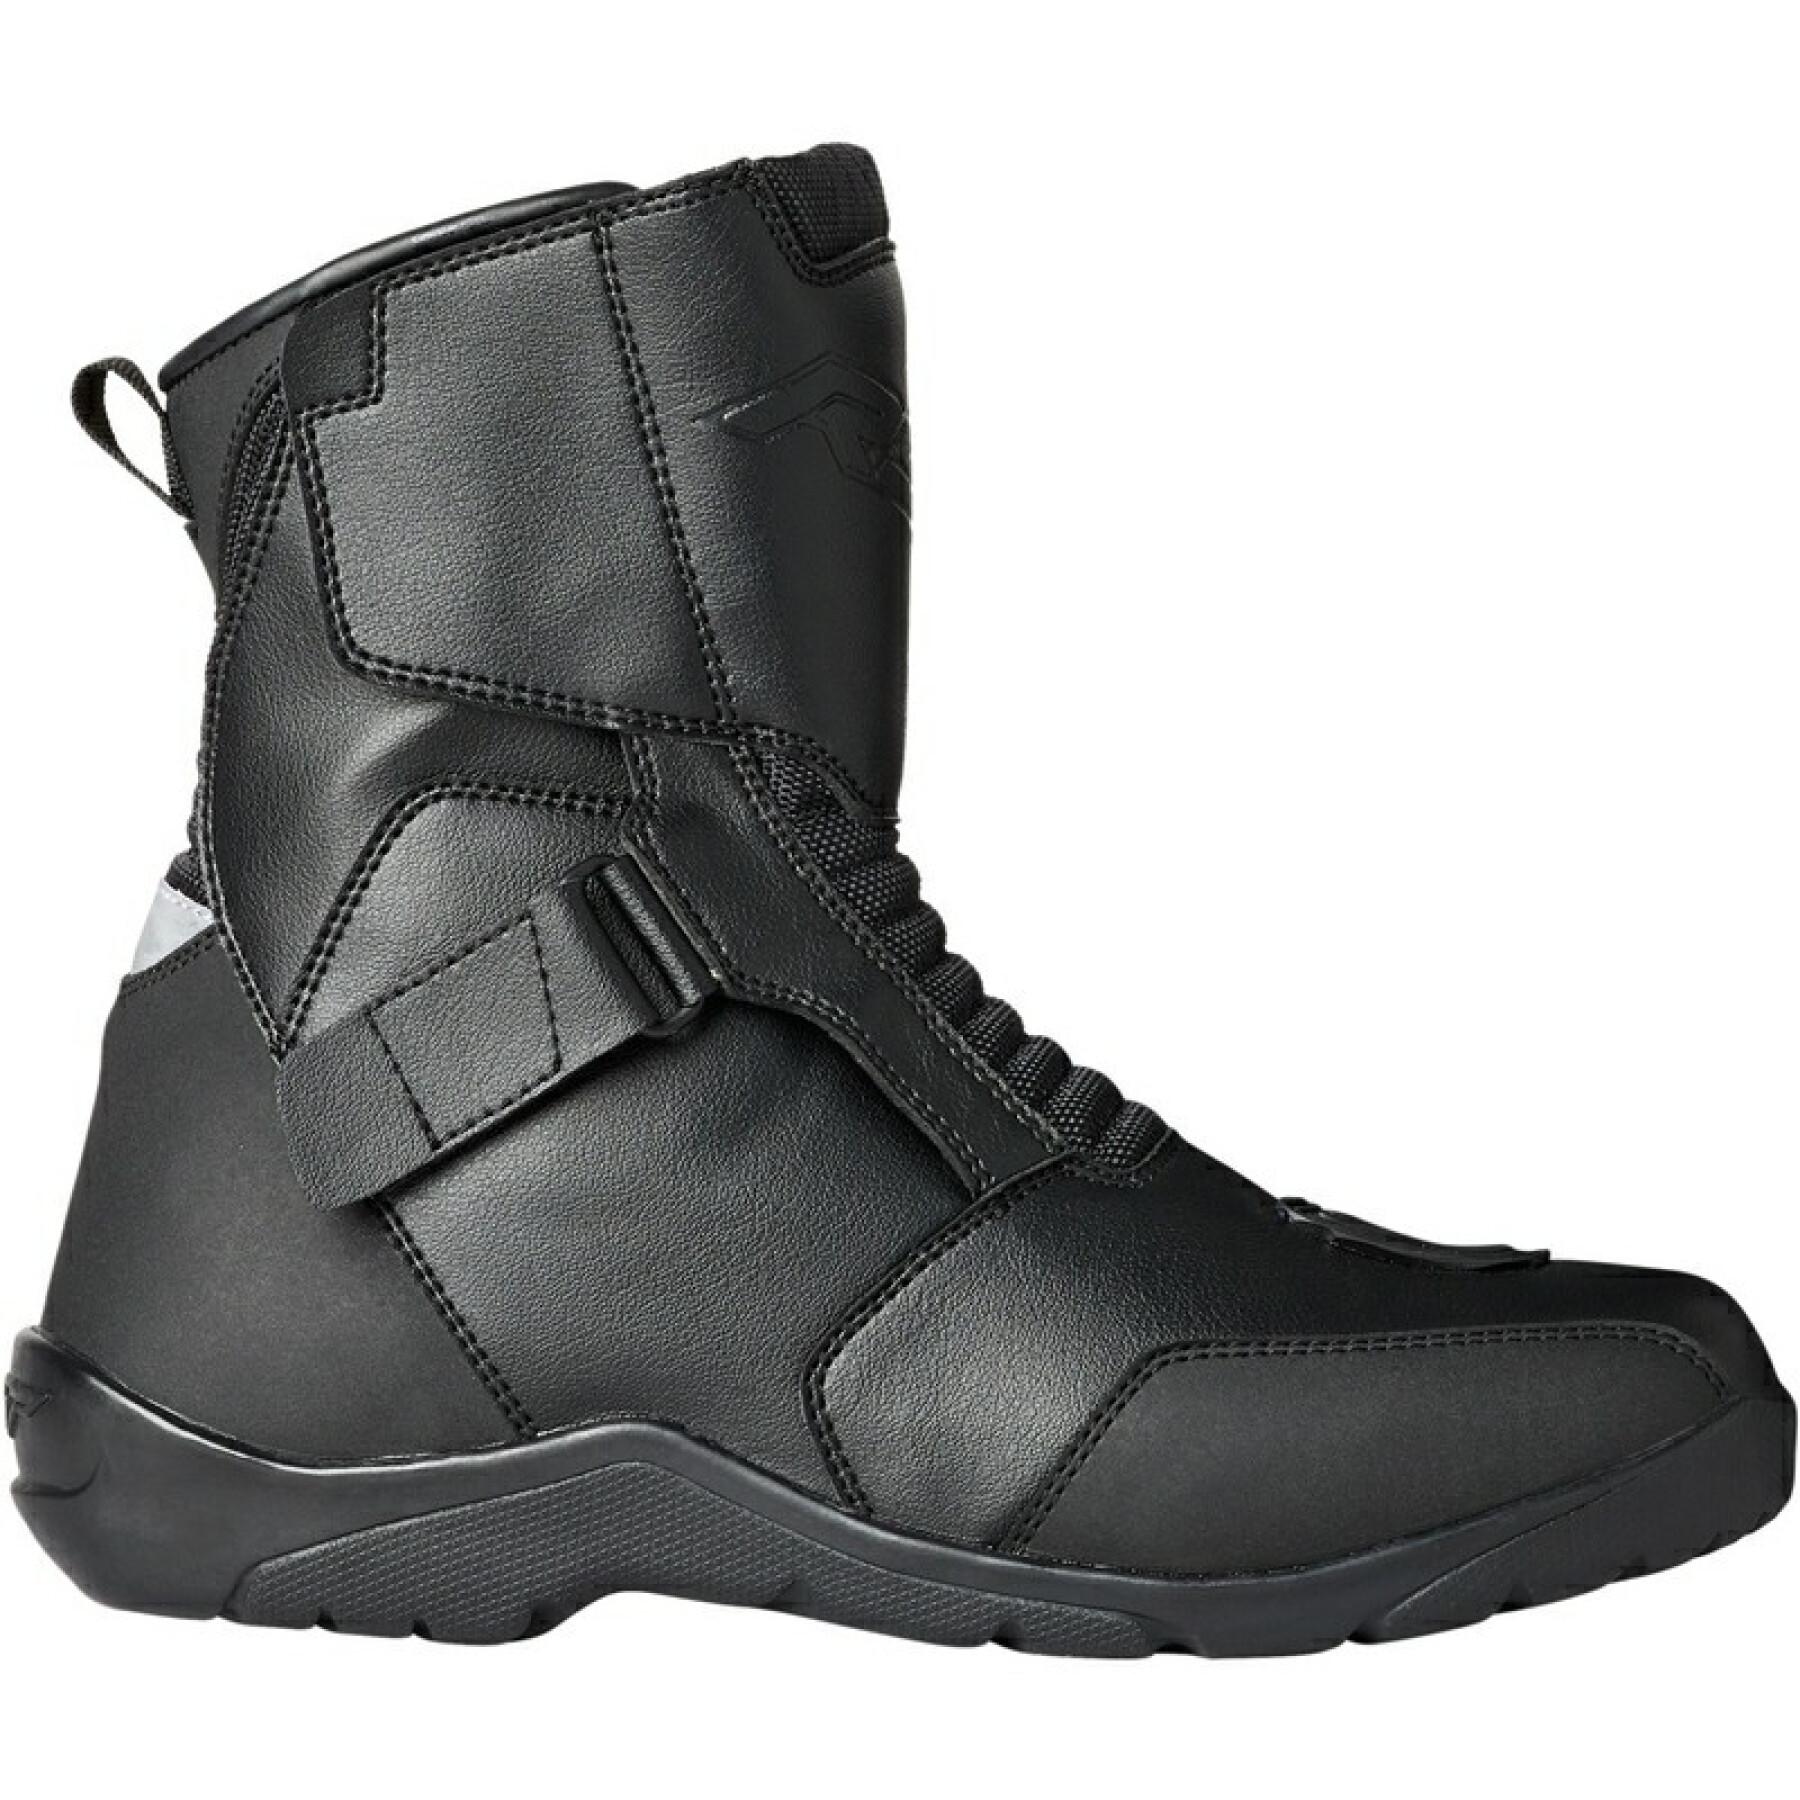 Bottes moto RST Axiom mid waterproof CE